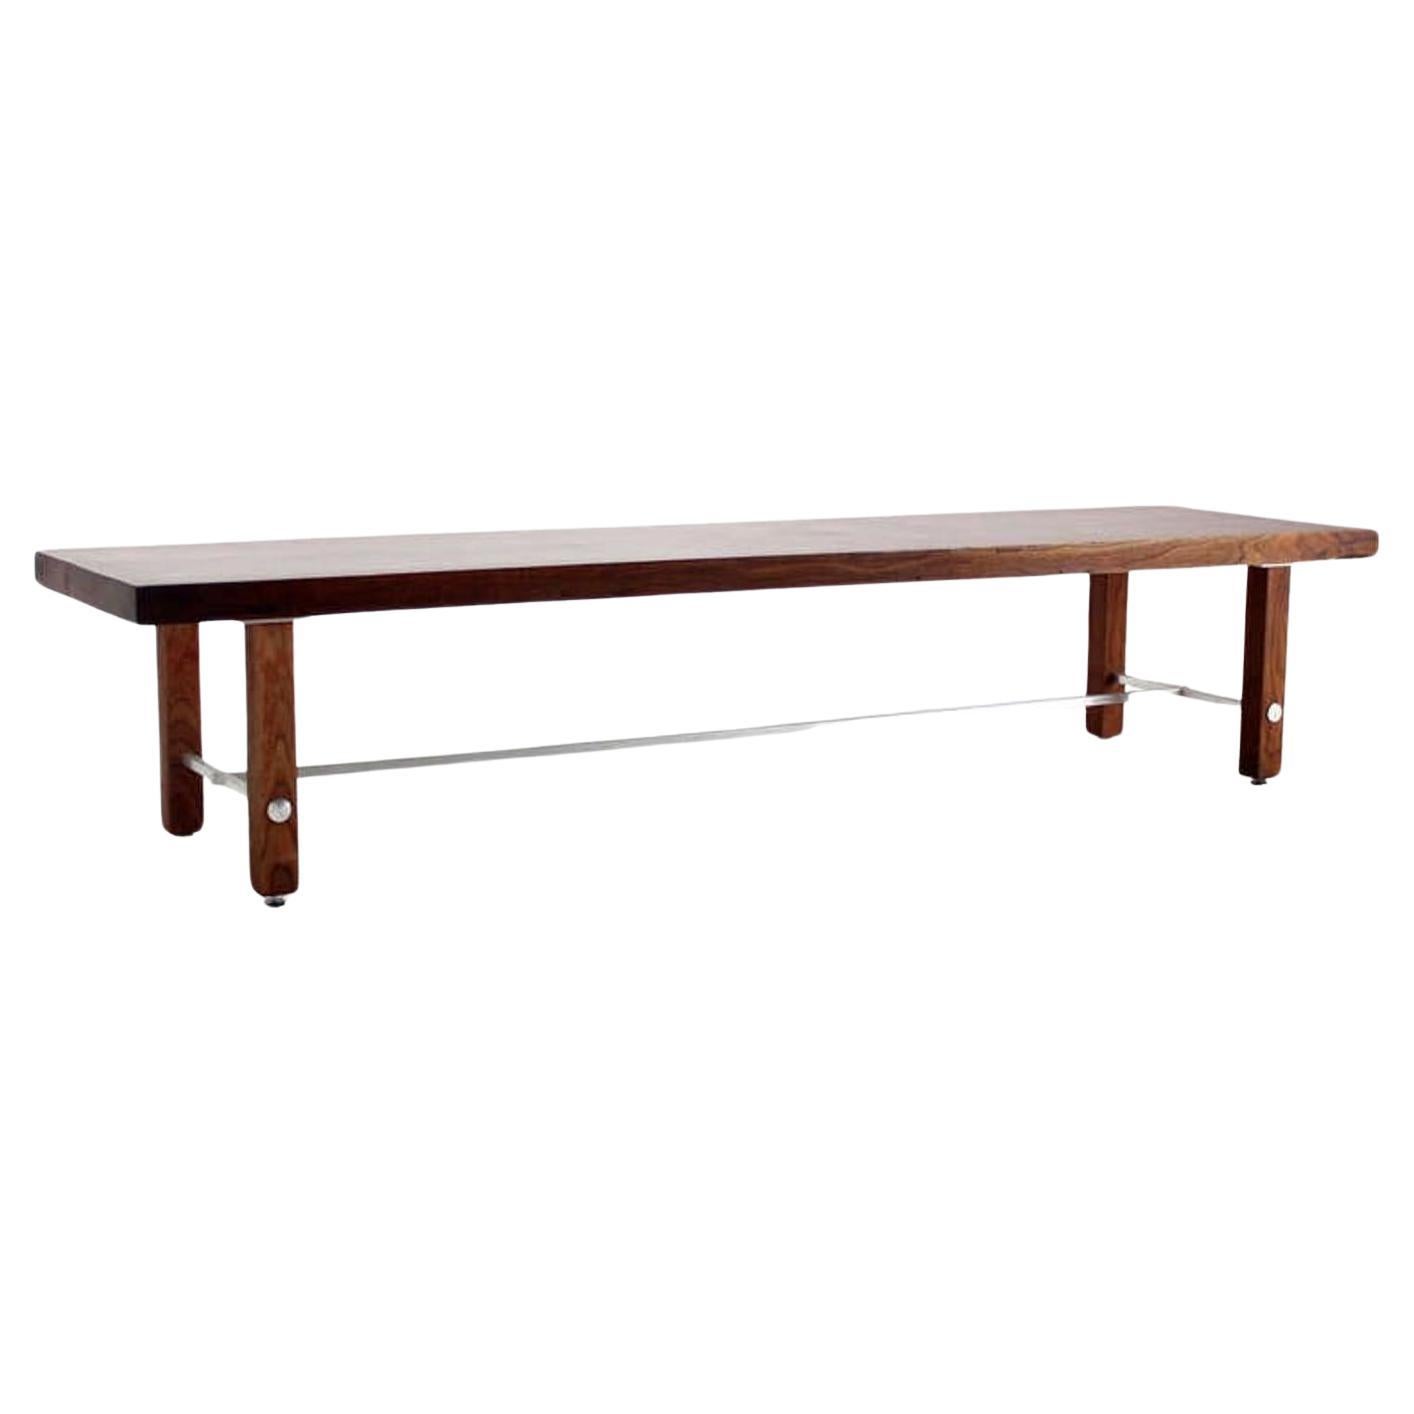 6 ' Long Solid Walnut Top Coffee Table or Bench on Solid Legs Aluminum Stretcher For Sale